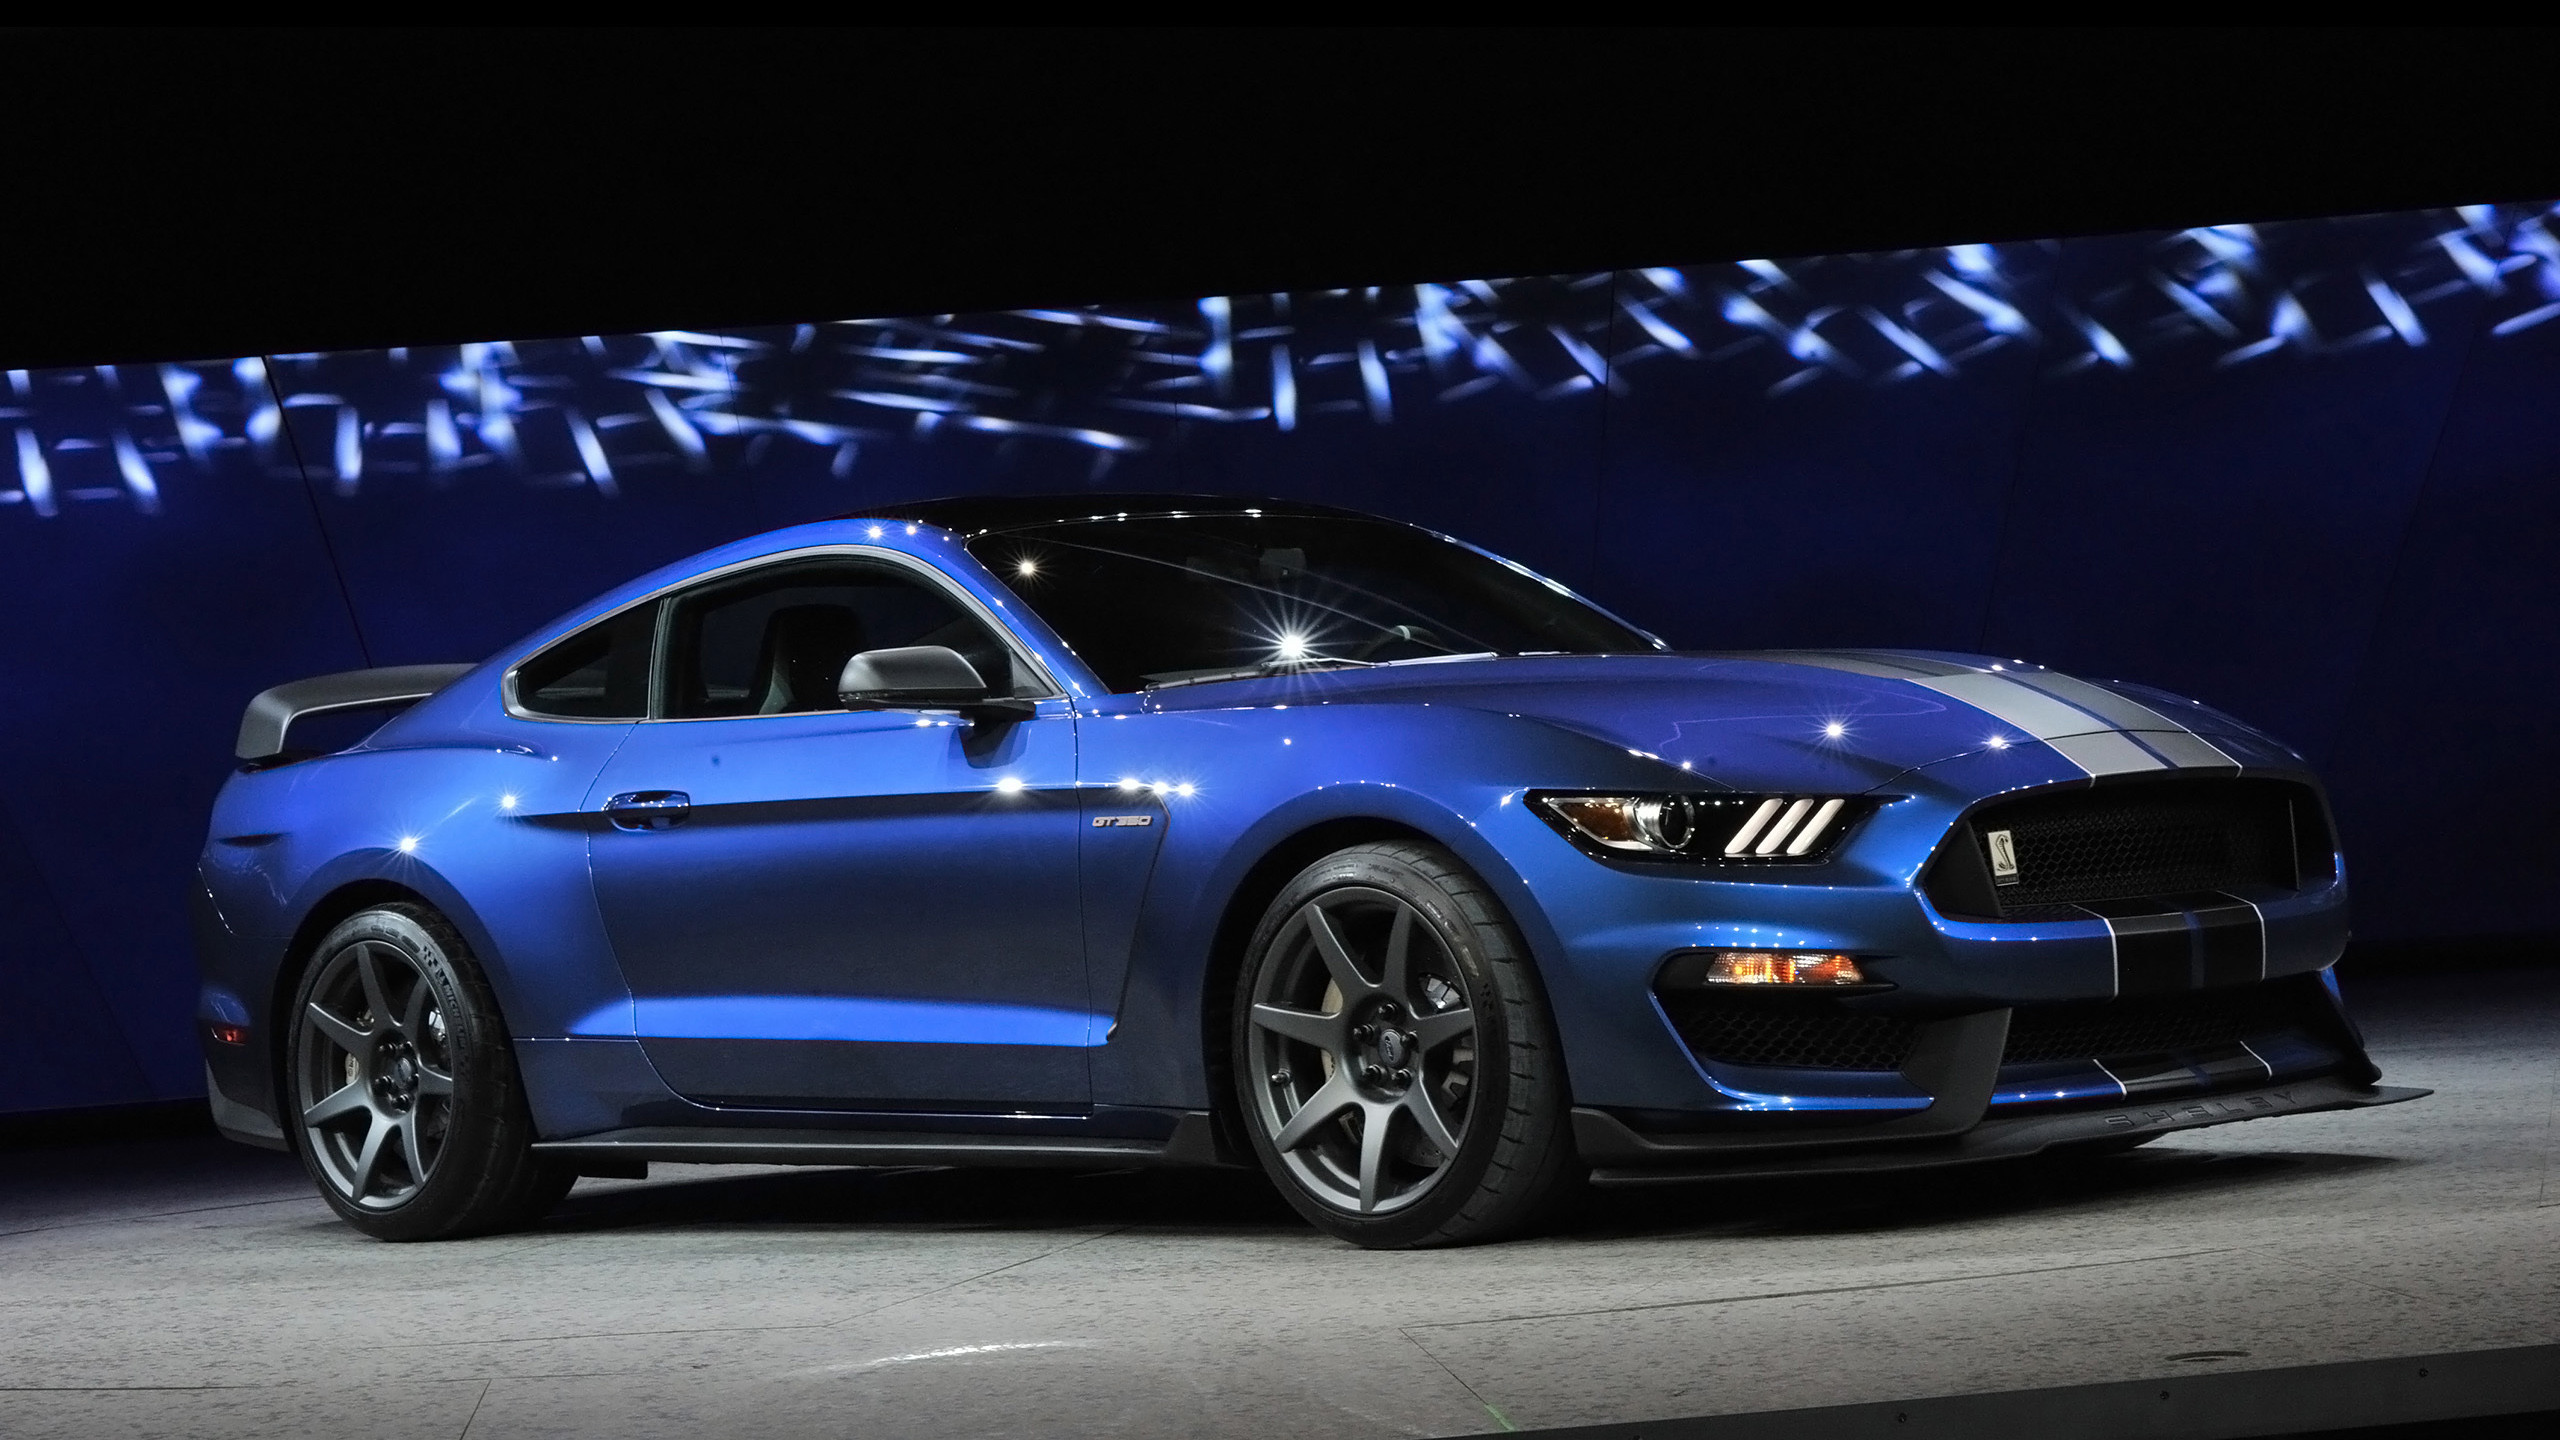 2560x1440 2016 Ford Mustang Shelby GT350R Wallpaper